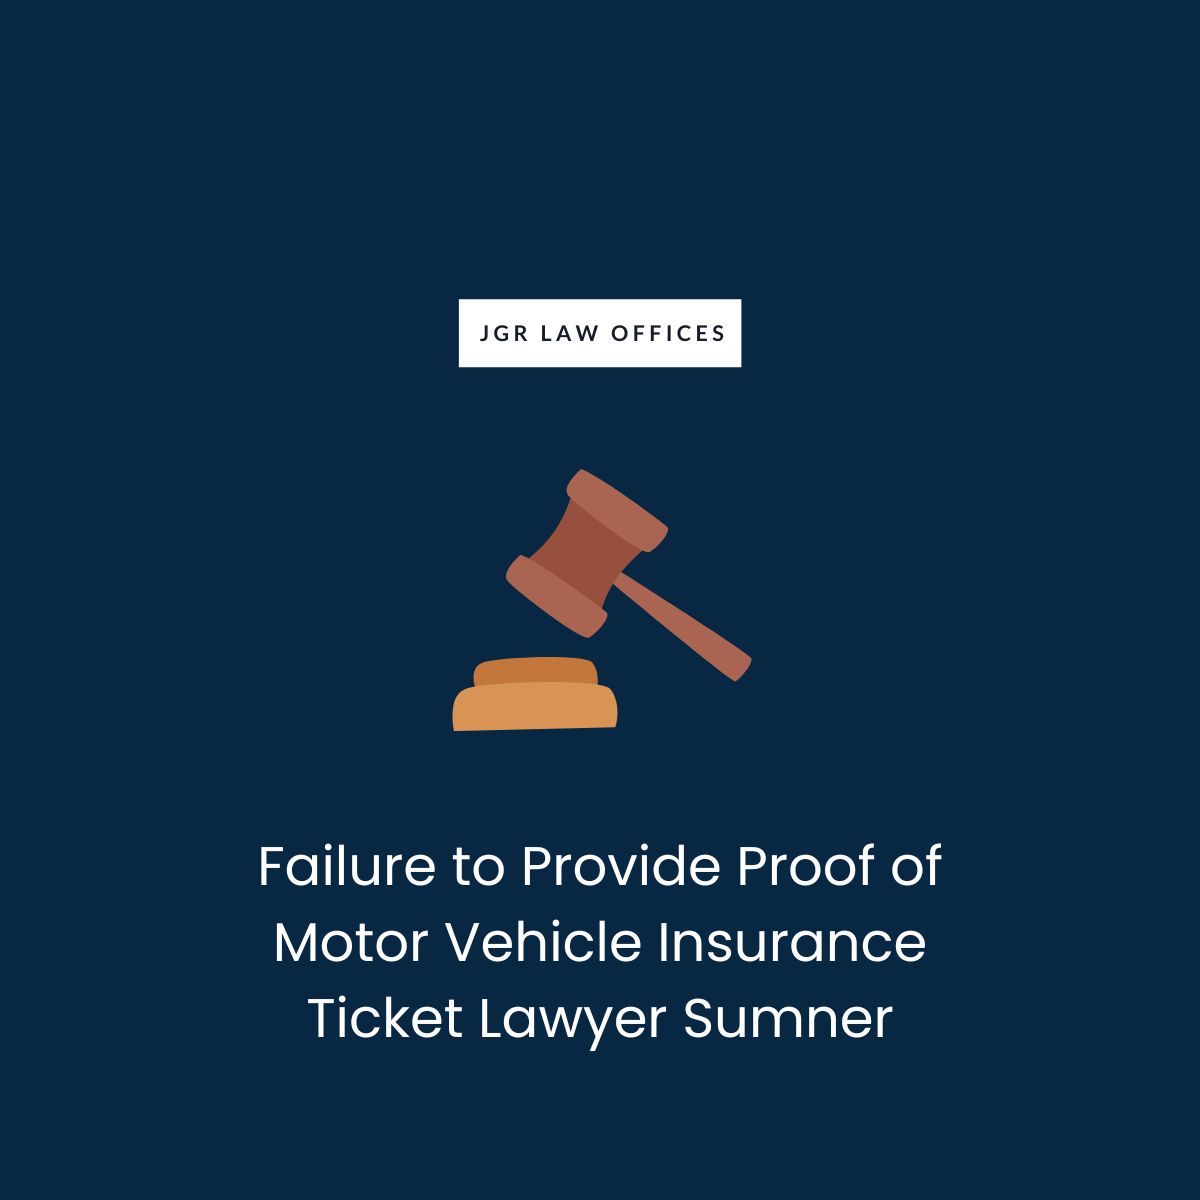 Failure to Provide Proof of Motor Vehicle Insurance Ticket Attorney Sumner